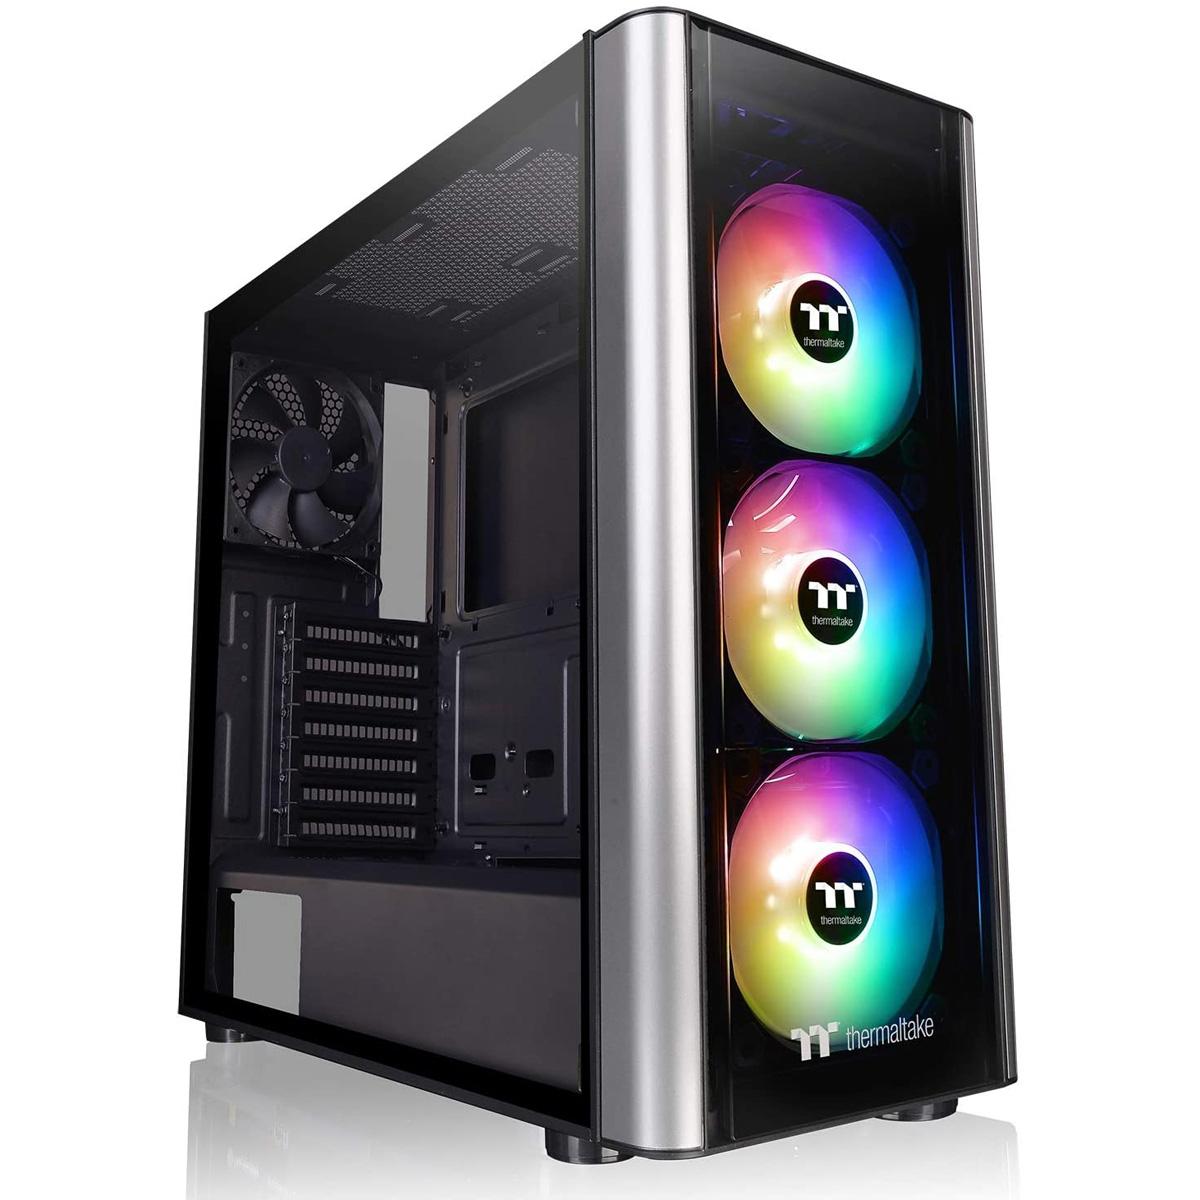 Thermaltake Level 20 MT Motherboard Sync ARGB ATX Mid Tower Case for $54.90 Shipped